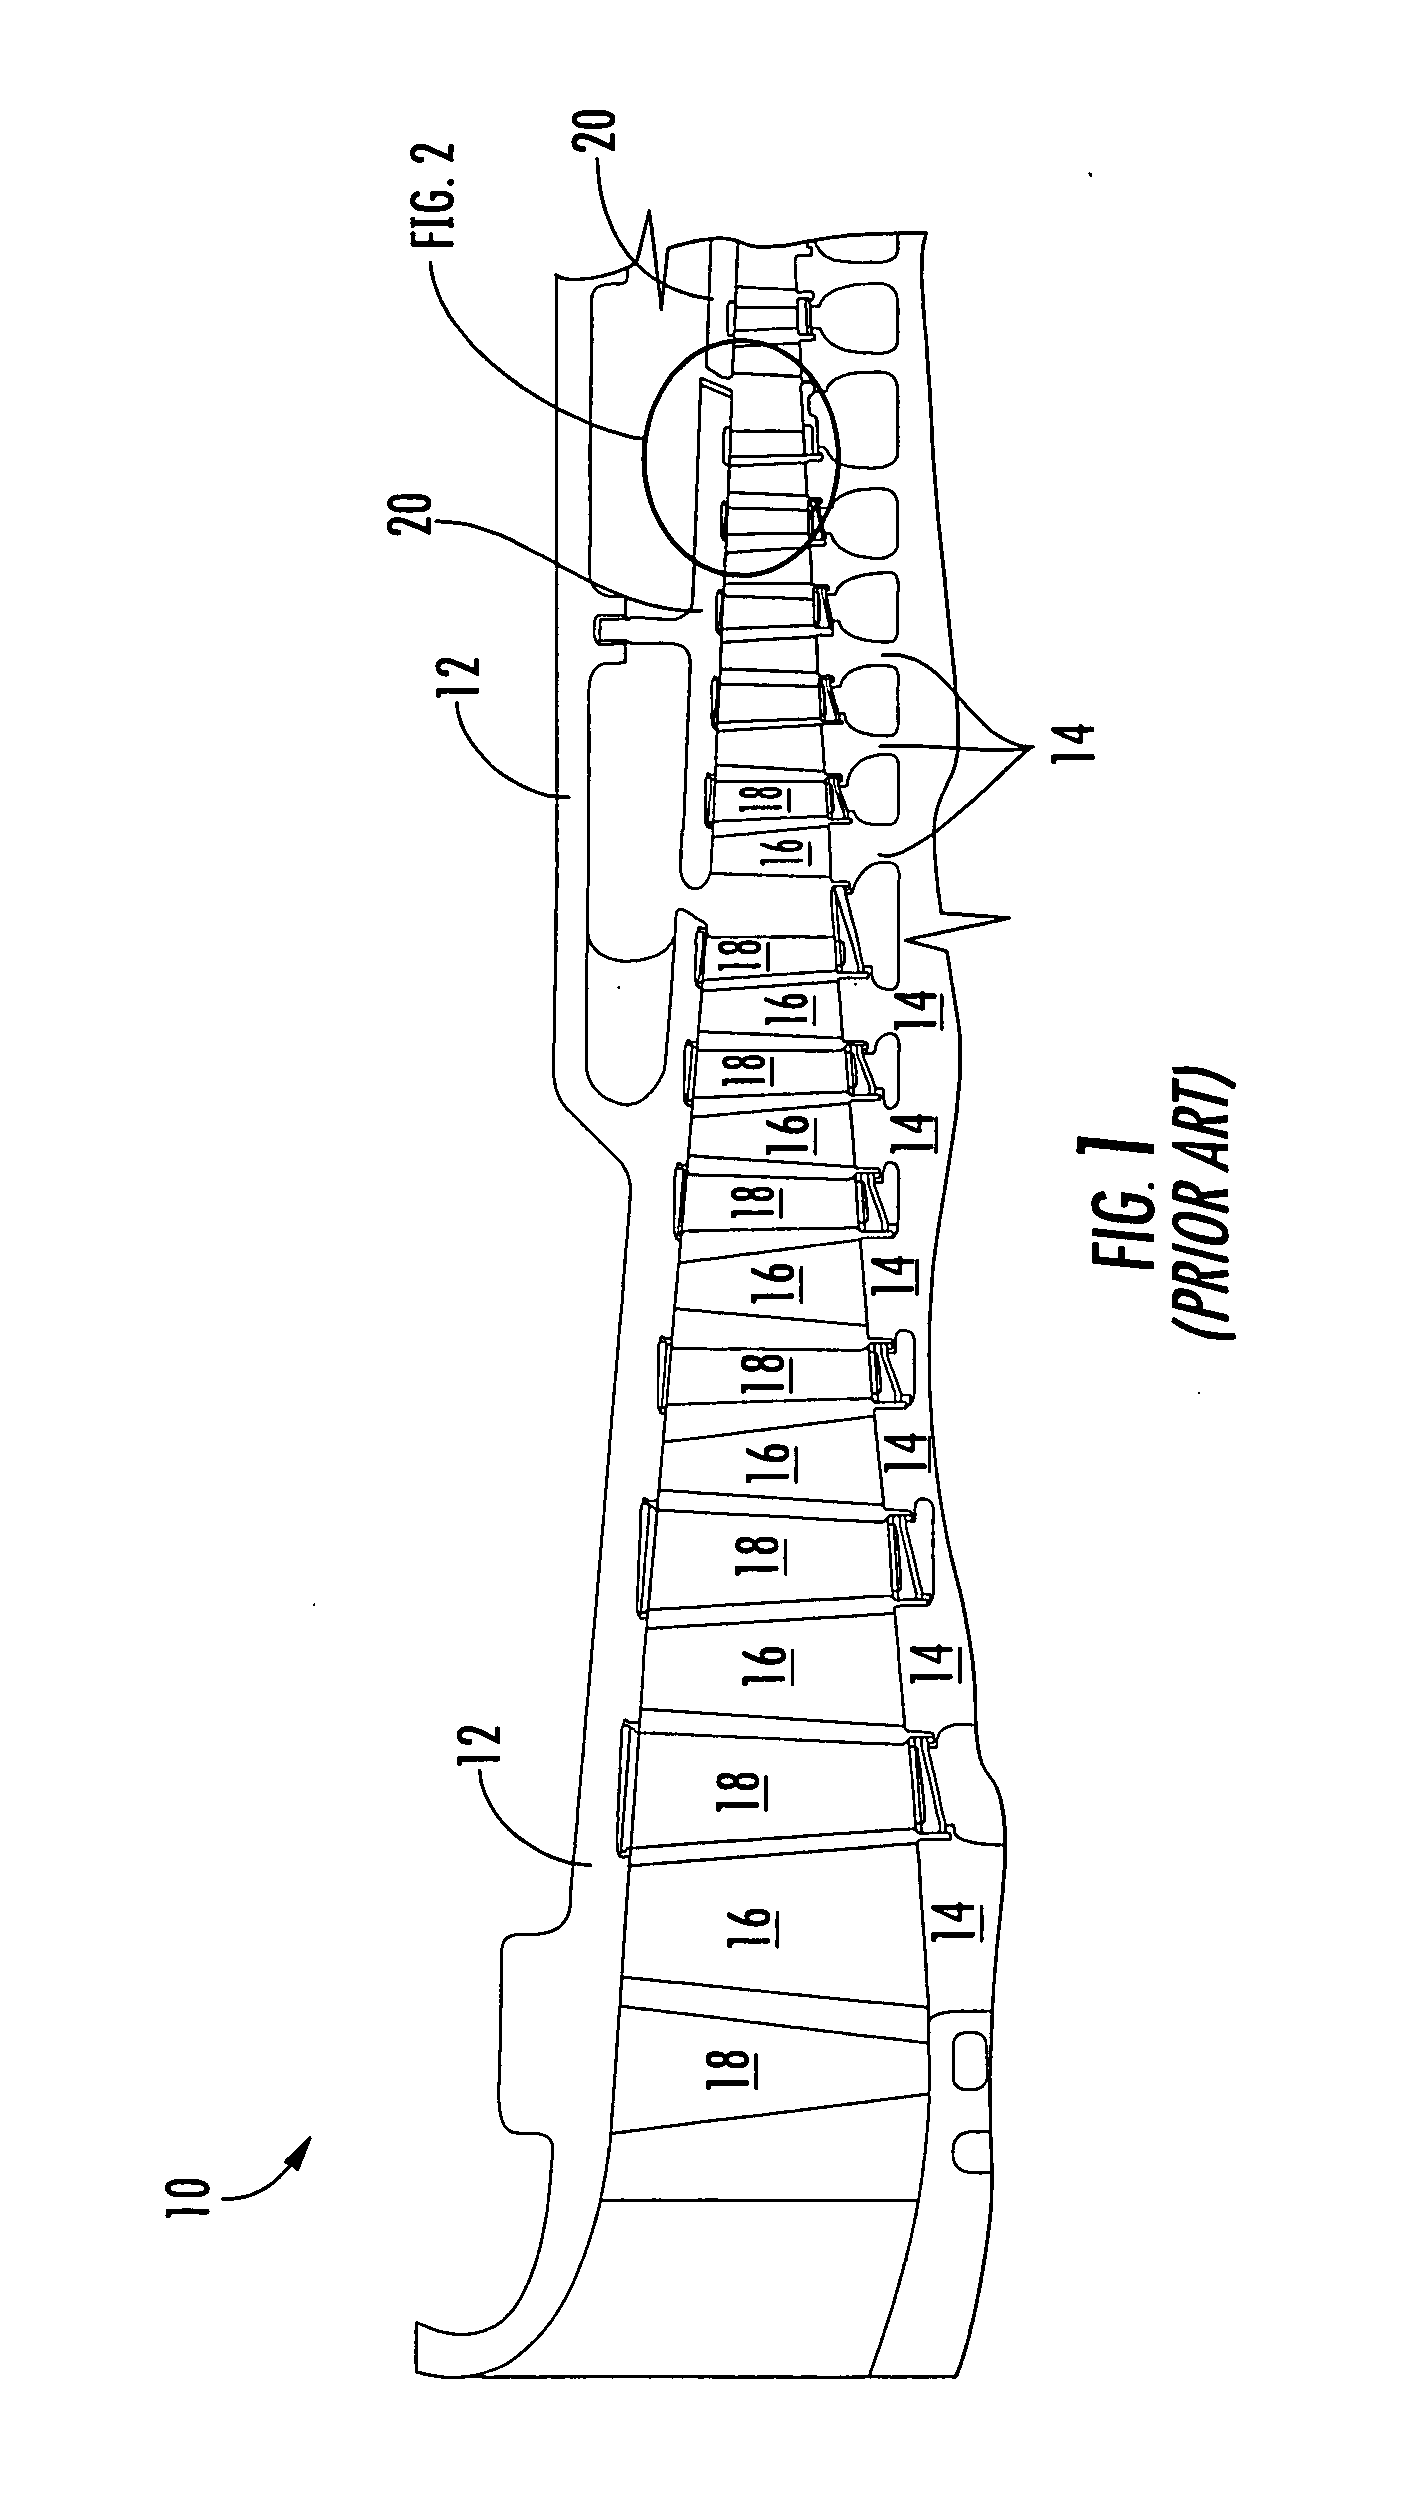 Blade clearance system for a turbine engine